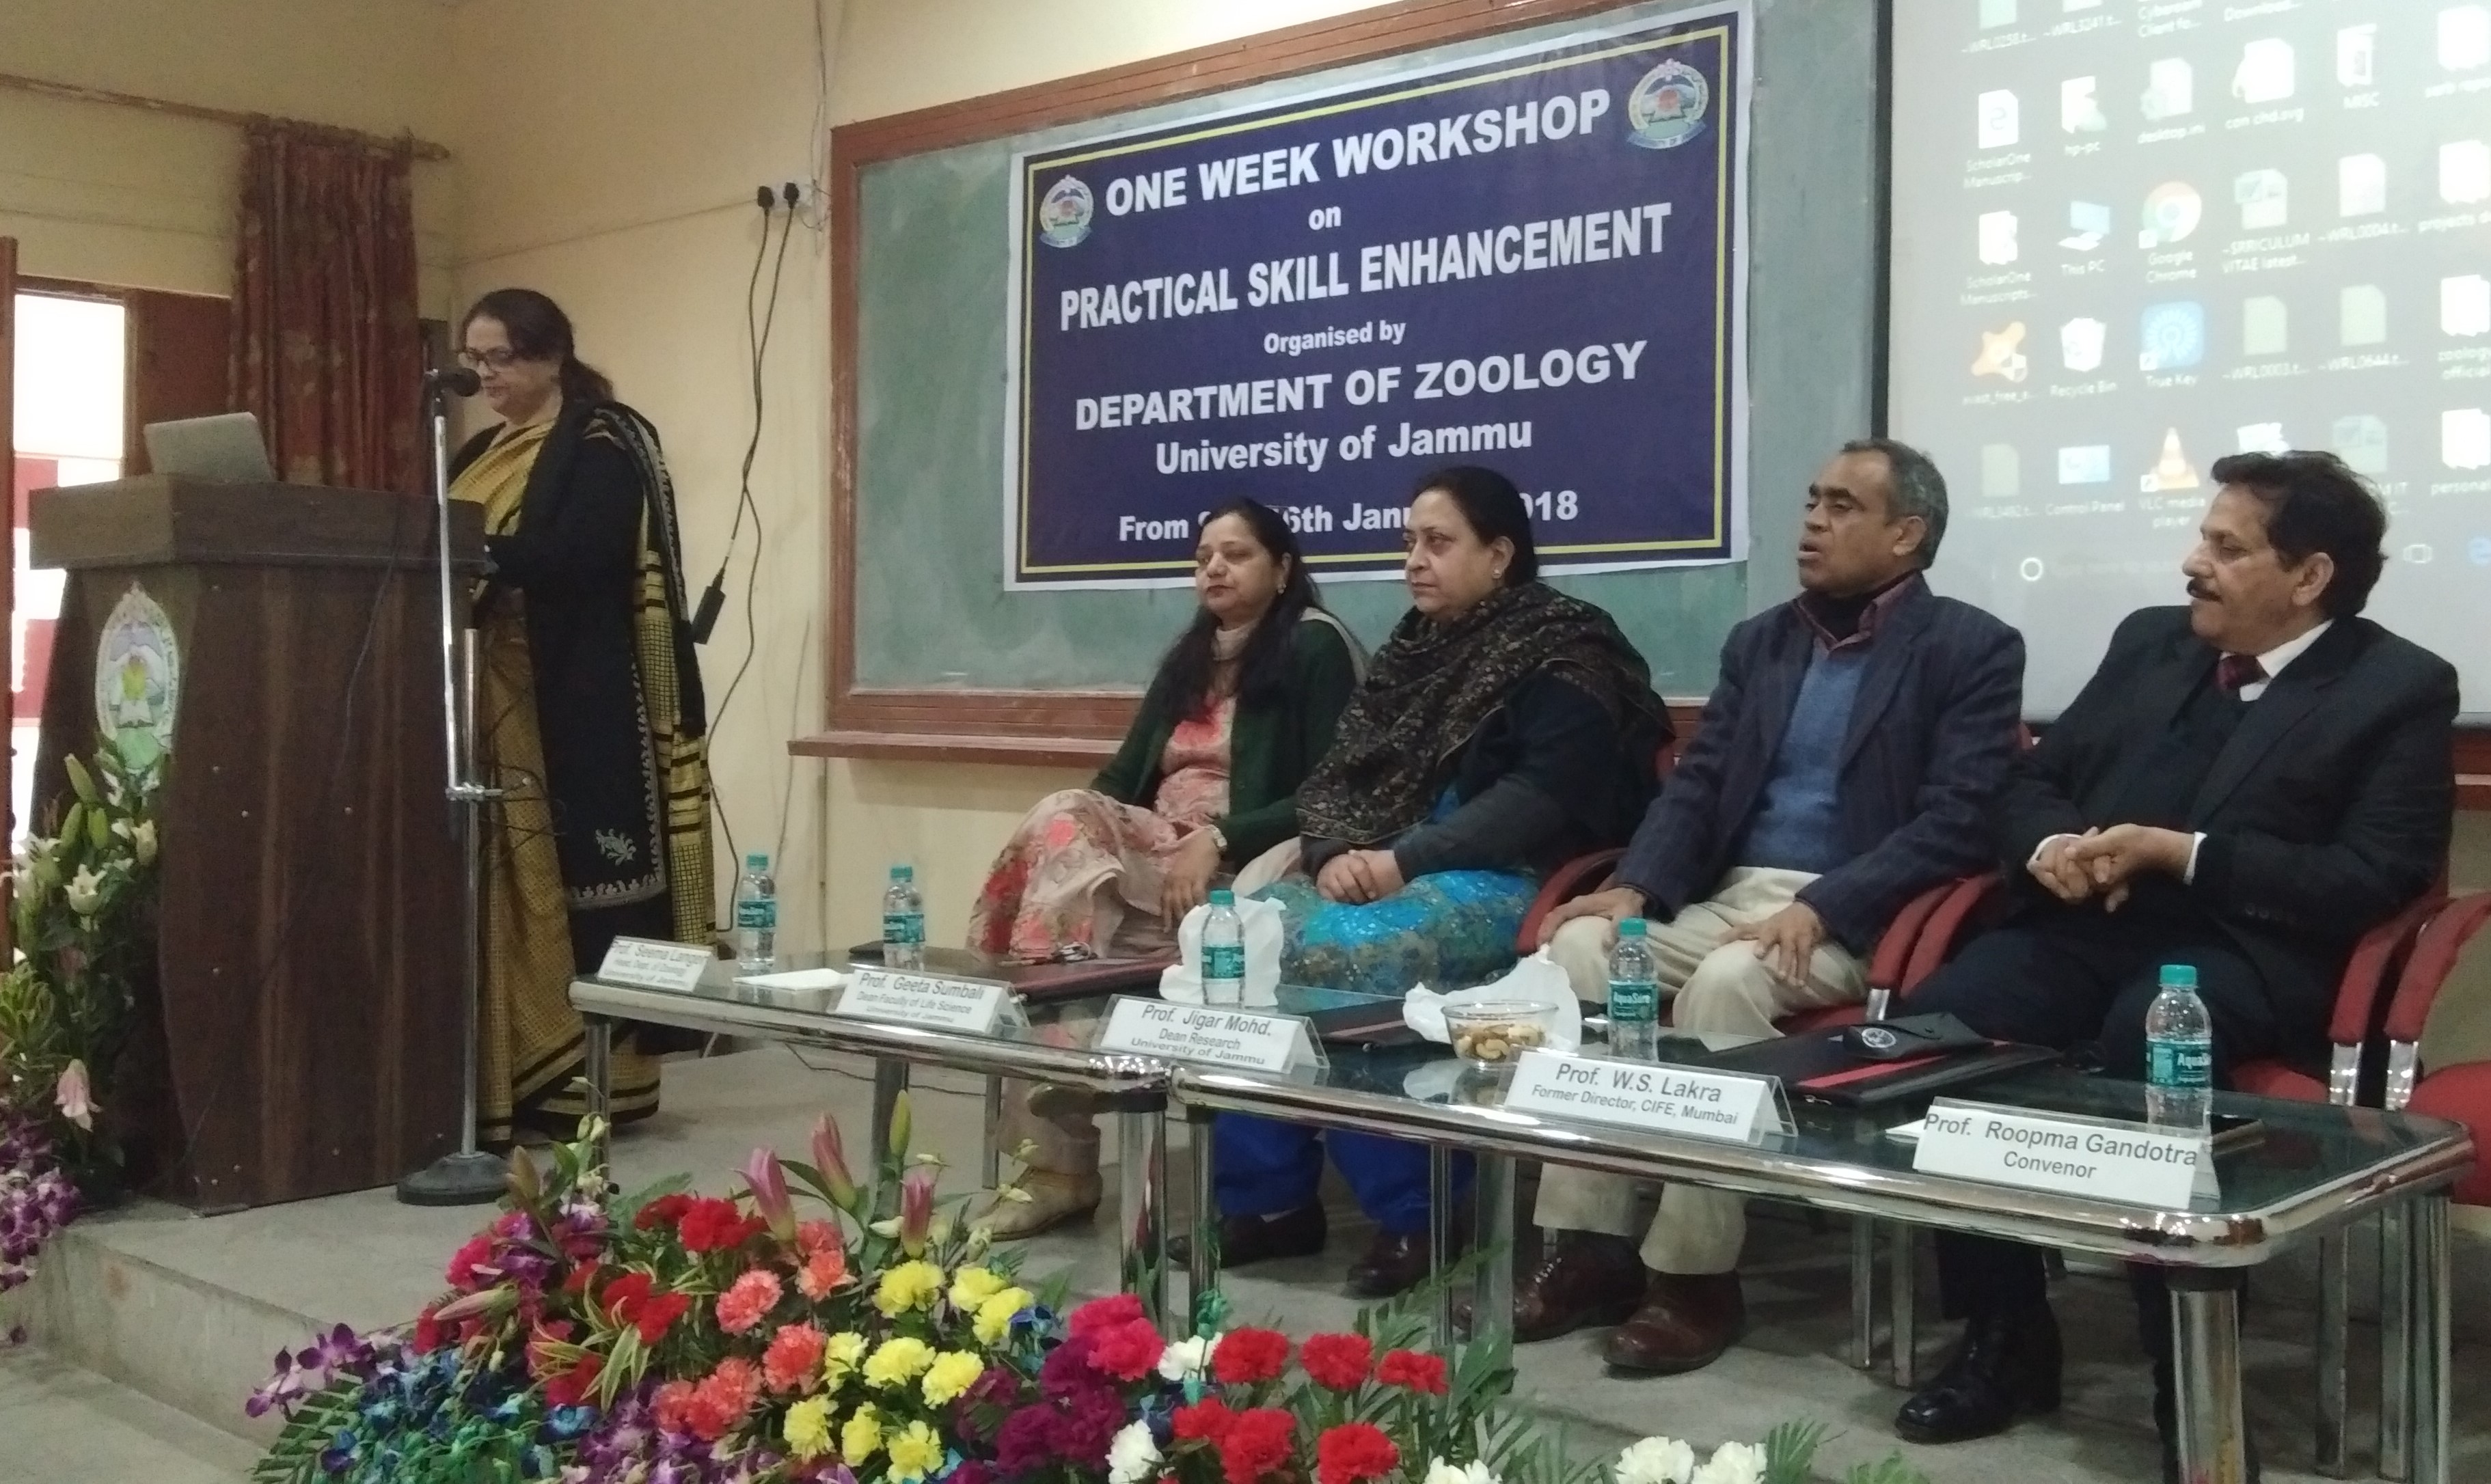 The Department of Zoology, University of Jammu organized a one-week "Practical Skill Enhancement Workshop".